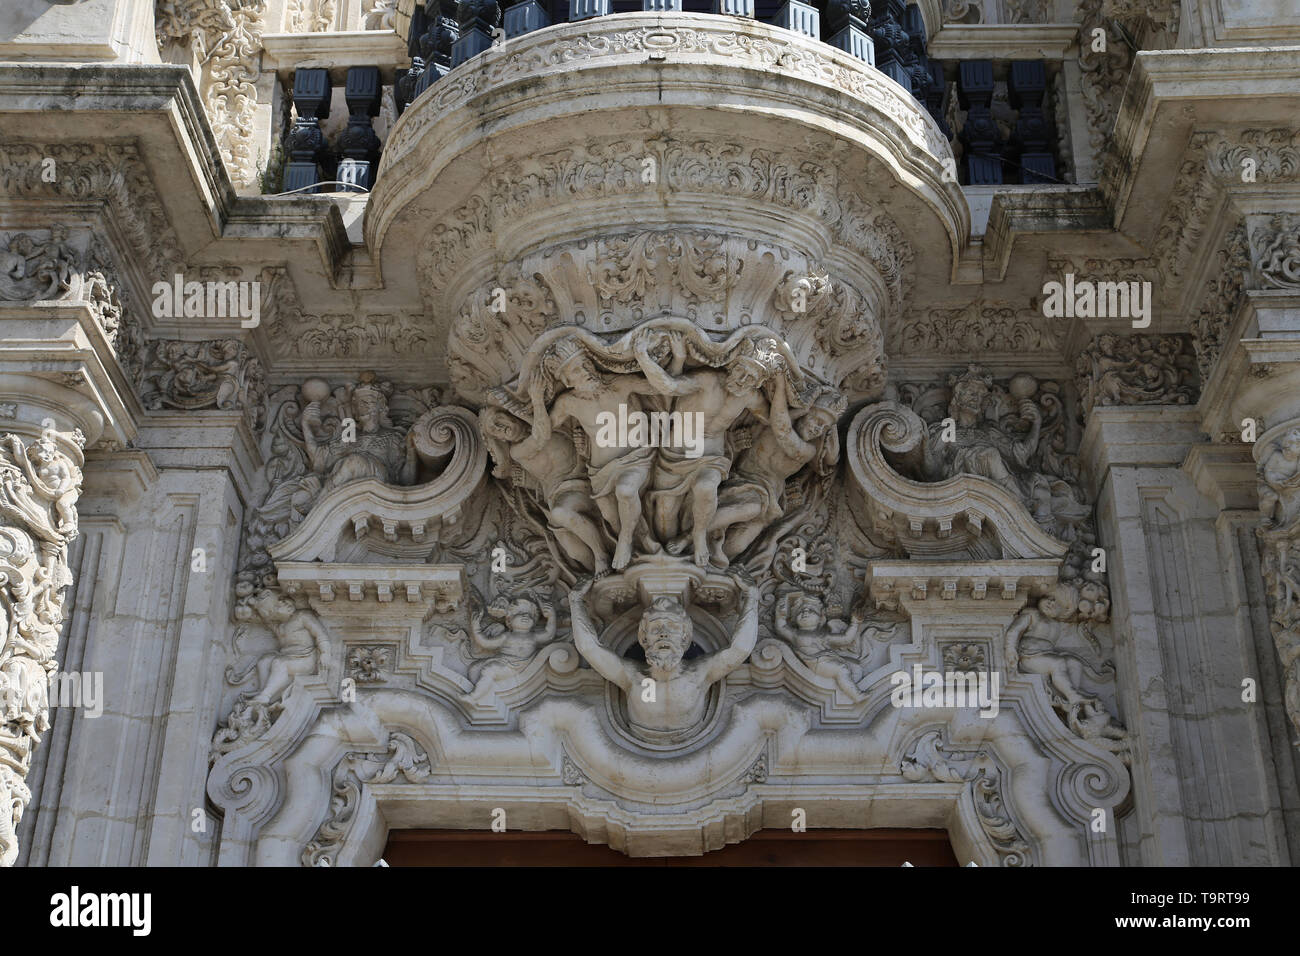 Spain. Andalusia. Seville. Palace of San Telmo. Main facade with Churrigueresque entrance, 1754 by Figueroa family. Detail. Stock Photo